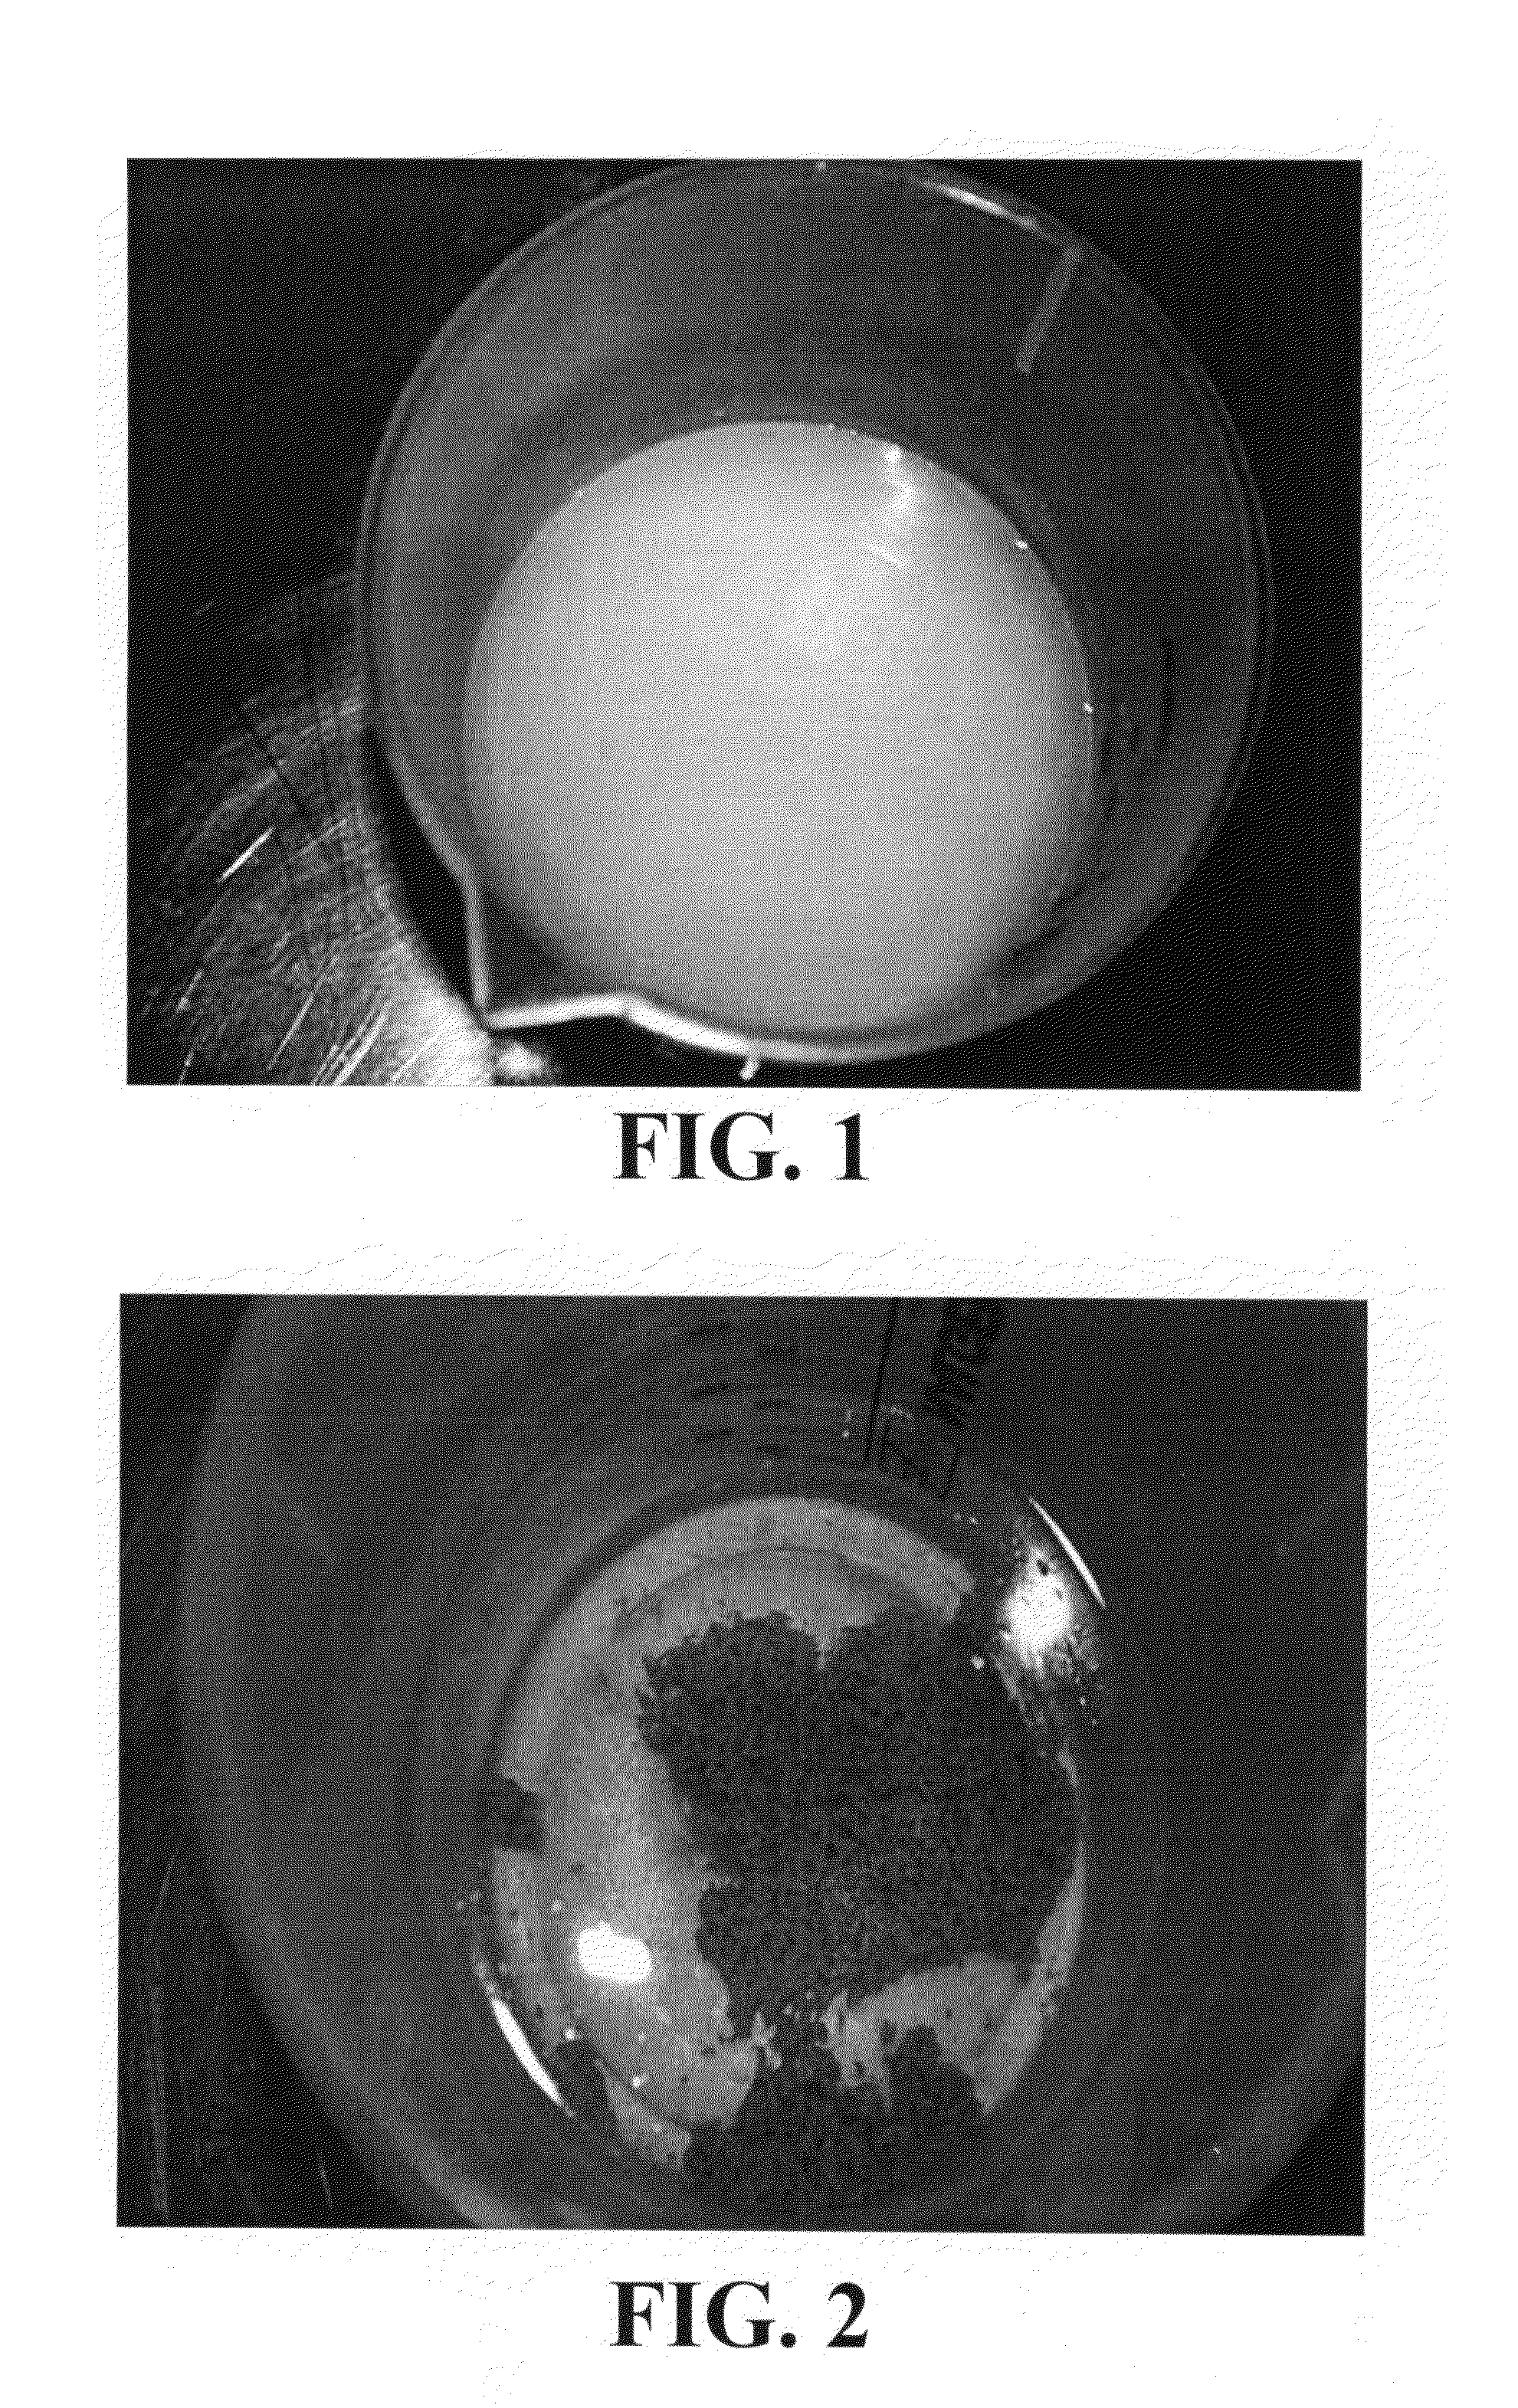 Sand aggregating reagents, modified sands, and methods for making and using same